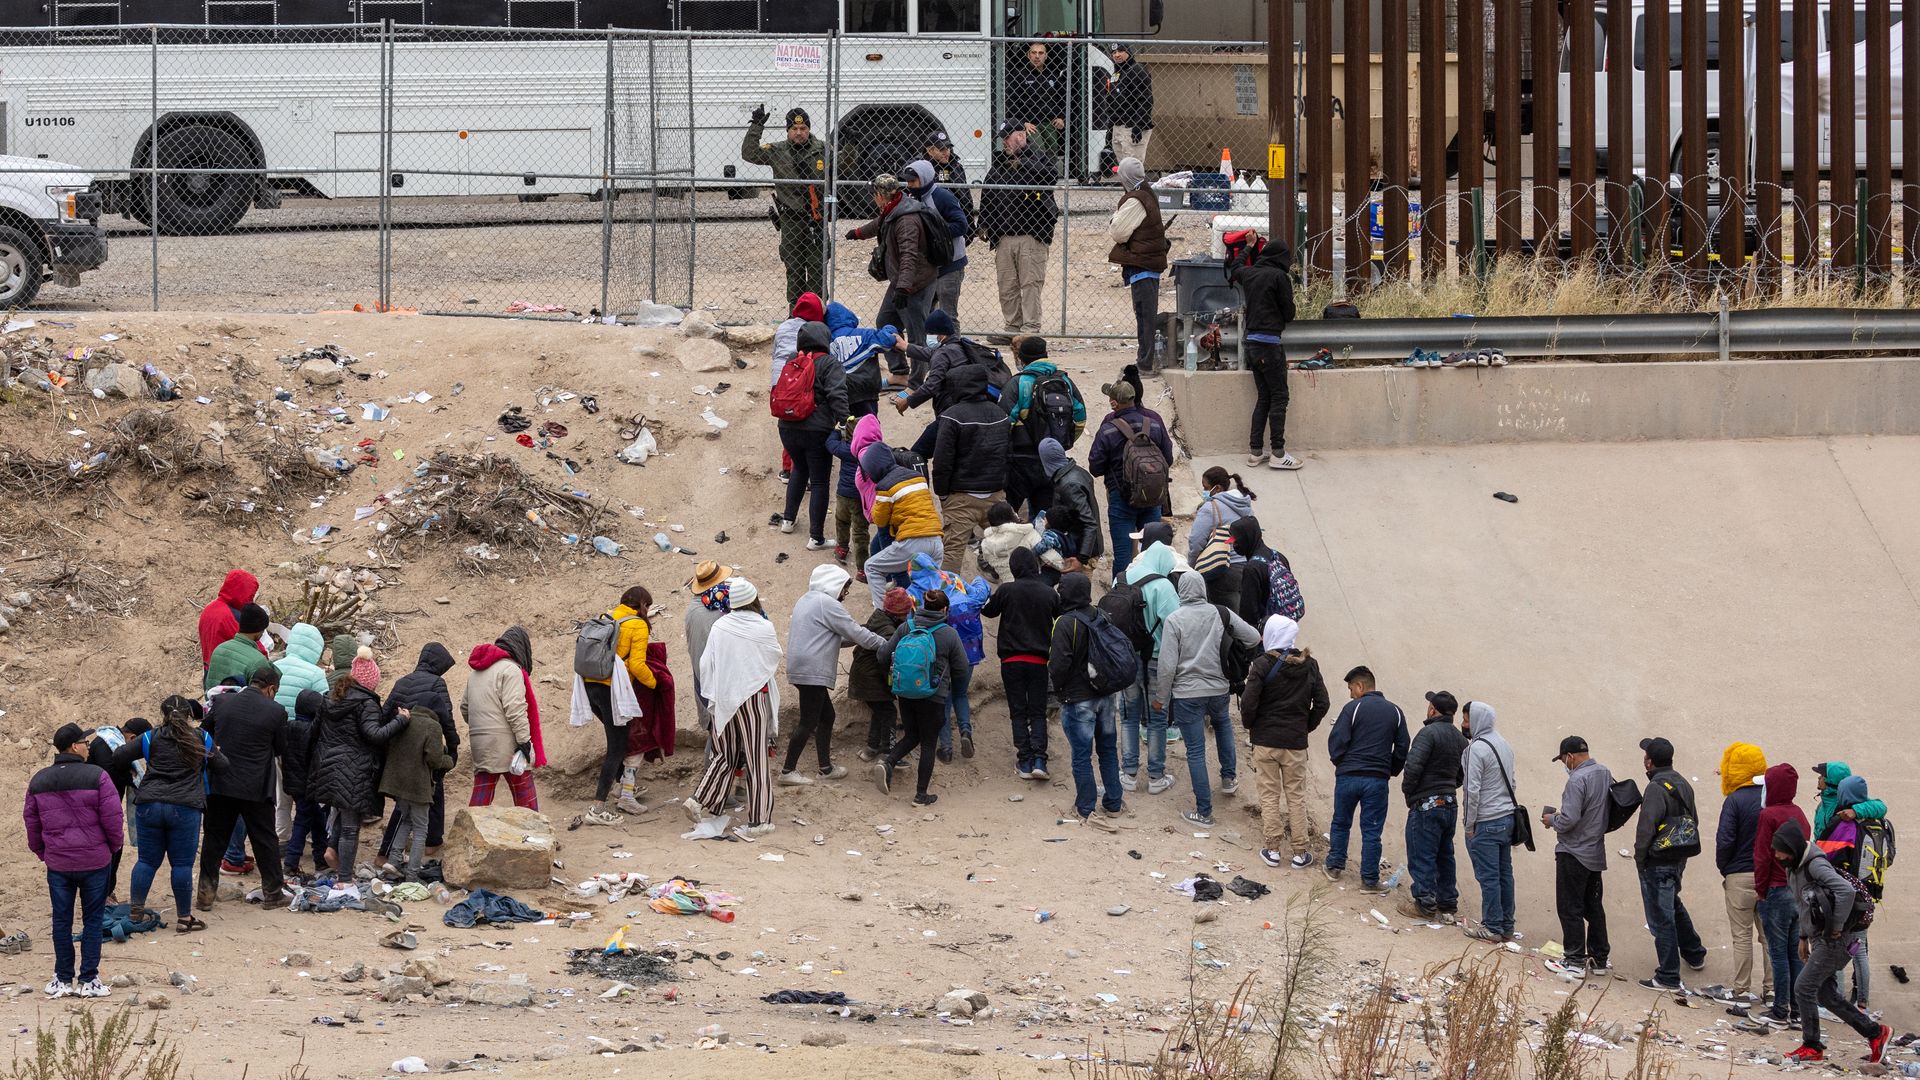 Photo of migrants lined up at a fence